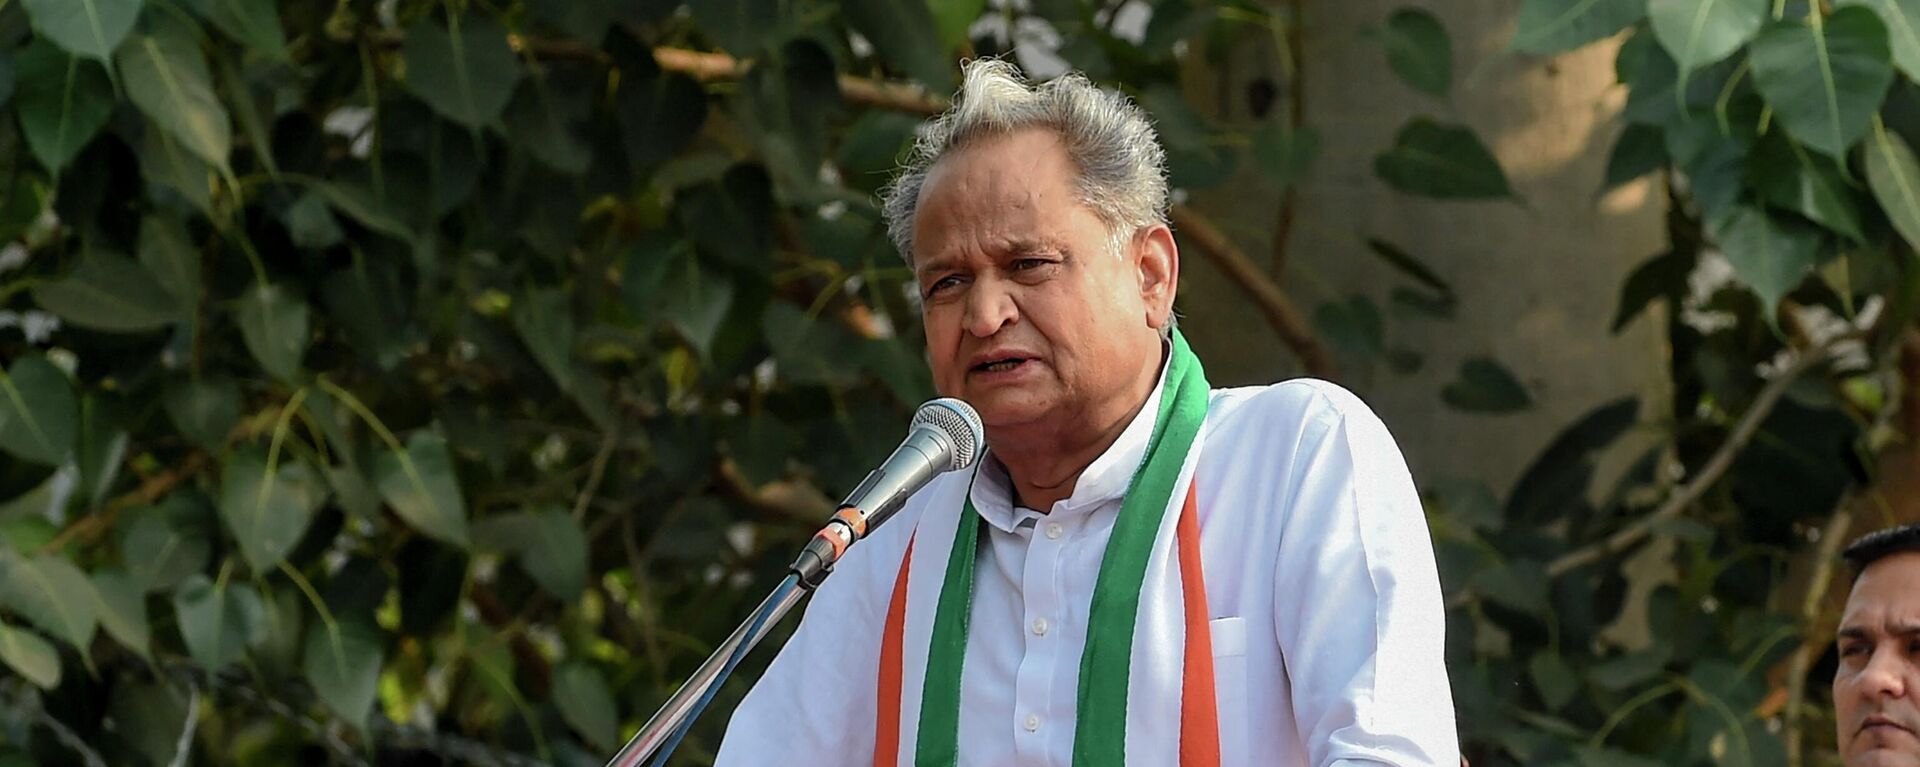 Rajasthan state's Chief Minister Ashok Gehlot speaks during a 'Janvedna Yatra' (rally) against the price rise of onions and vegetables, in Ahmedabad on November 30, 2019 - Sputnik International, 1920, 26.09.2022